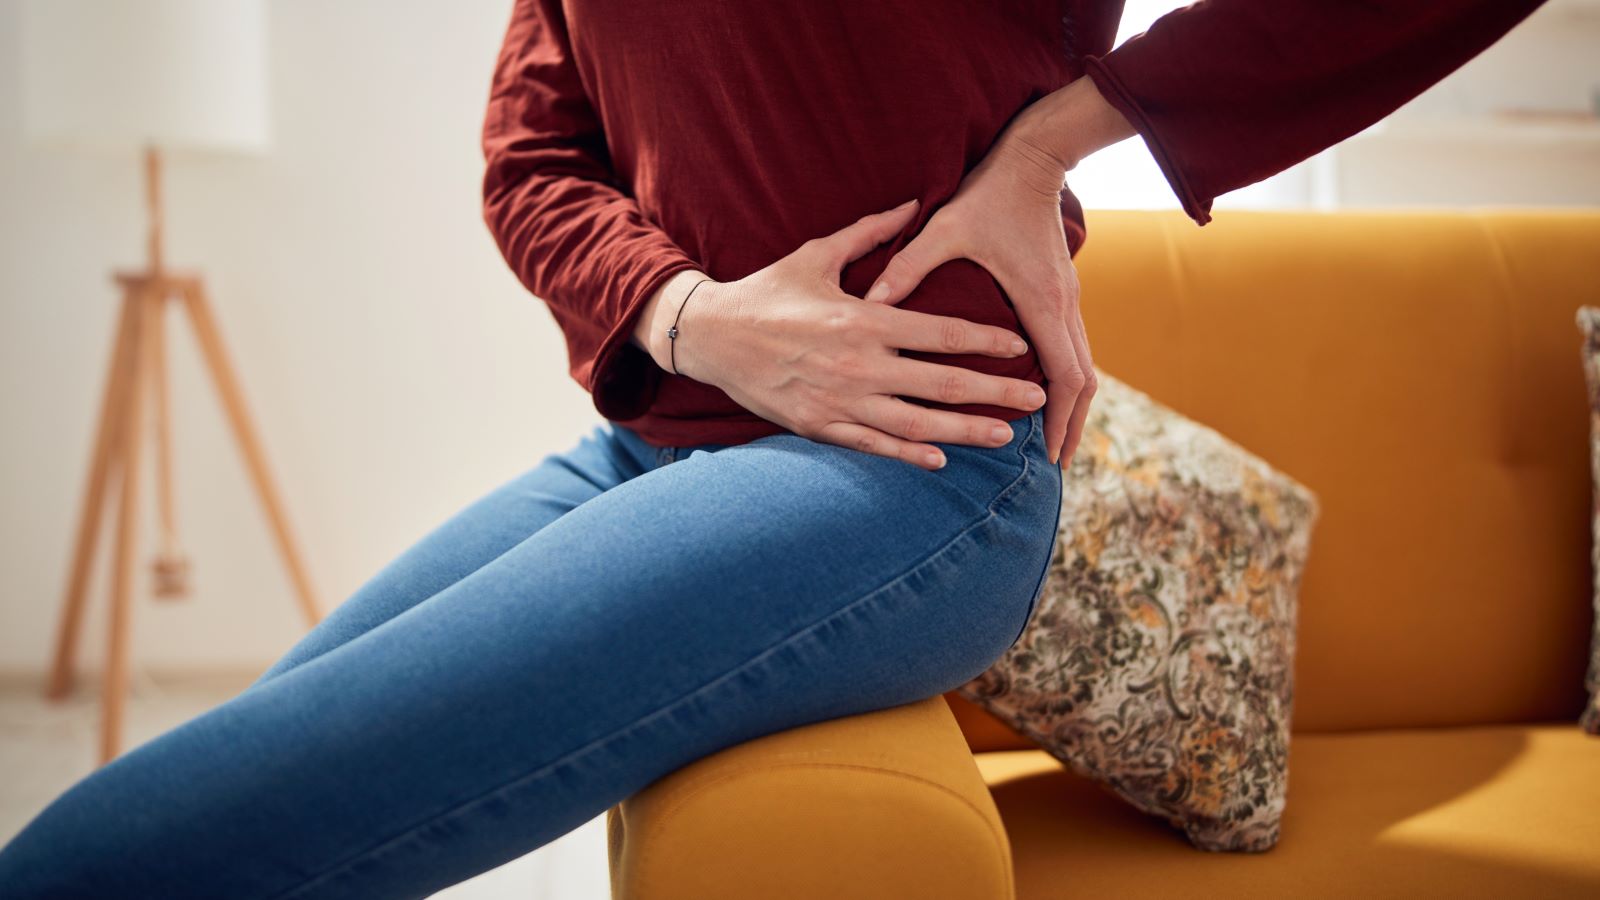 Hip pain is usually benign and treatable without surgery. Here are the 5 common causes of hip pain, how to treat it, and when to see a doctor.